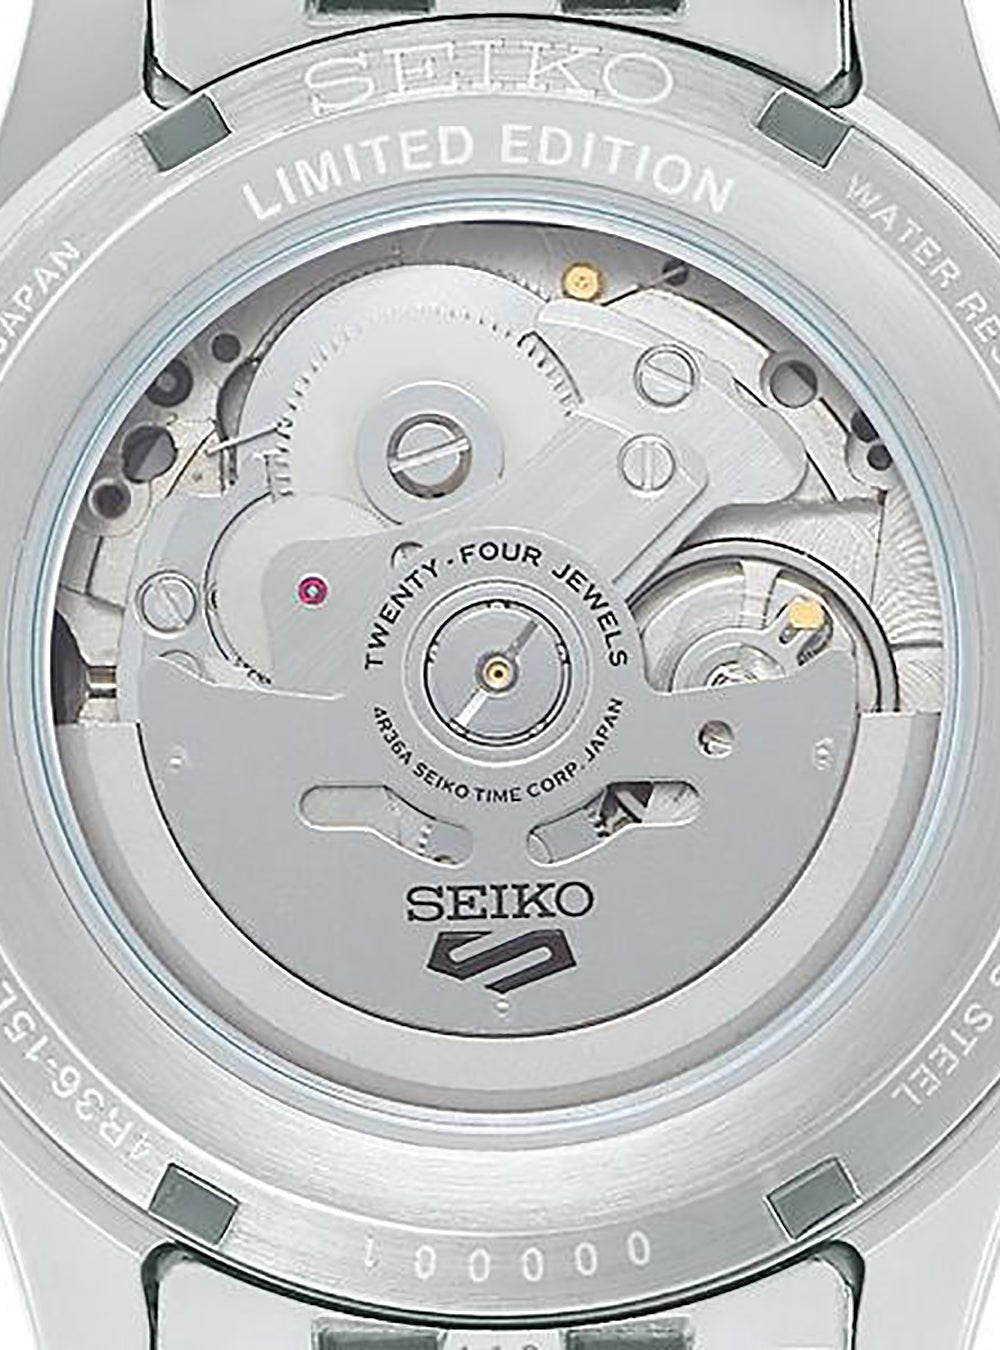 SEIKO 5 SPORTS FIELD SPORTS STYLE SEIKO WATCHMAKING 110TH ANNIVERSARY LIMITED EDITION SBSA241 MADE IN JAPAN JDMWRISTWATCHjapan-select